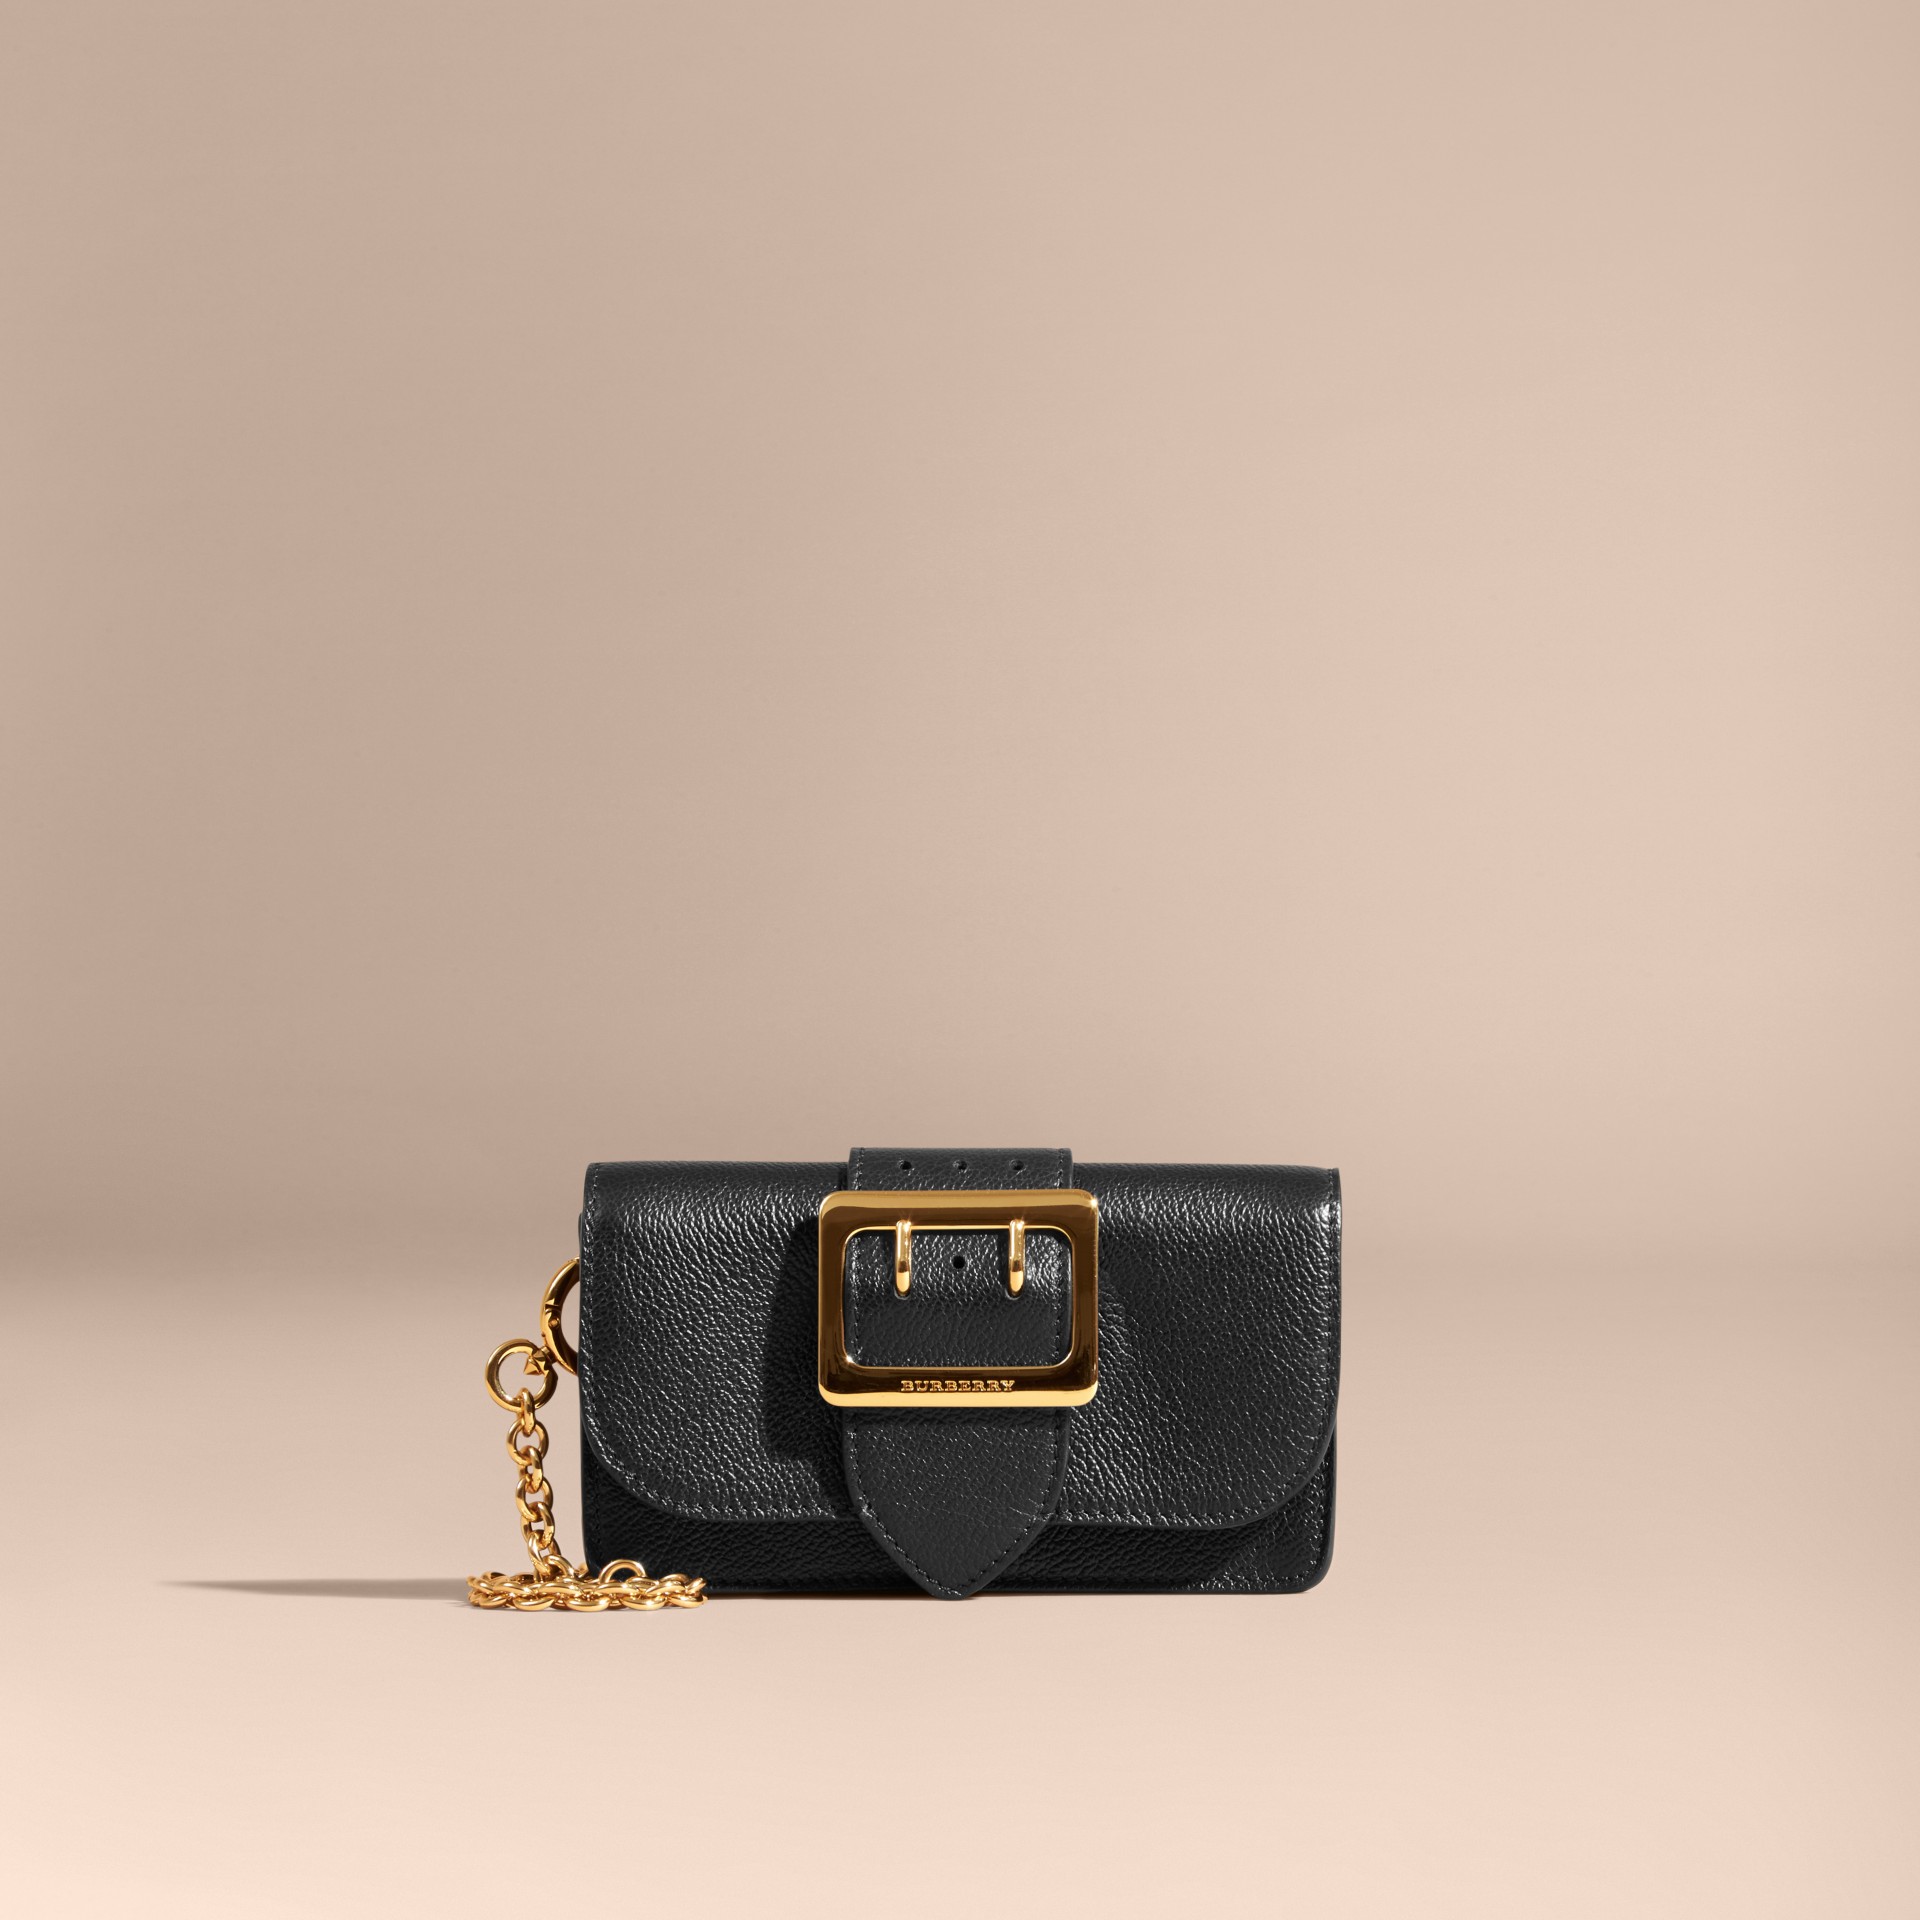 The Mini Buckle Bag in Grainy Leather Black | Burberry